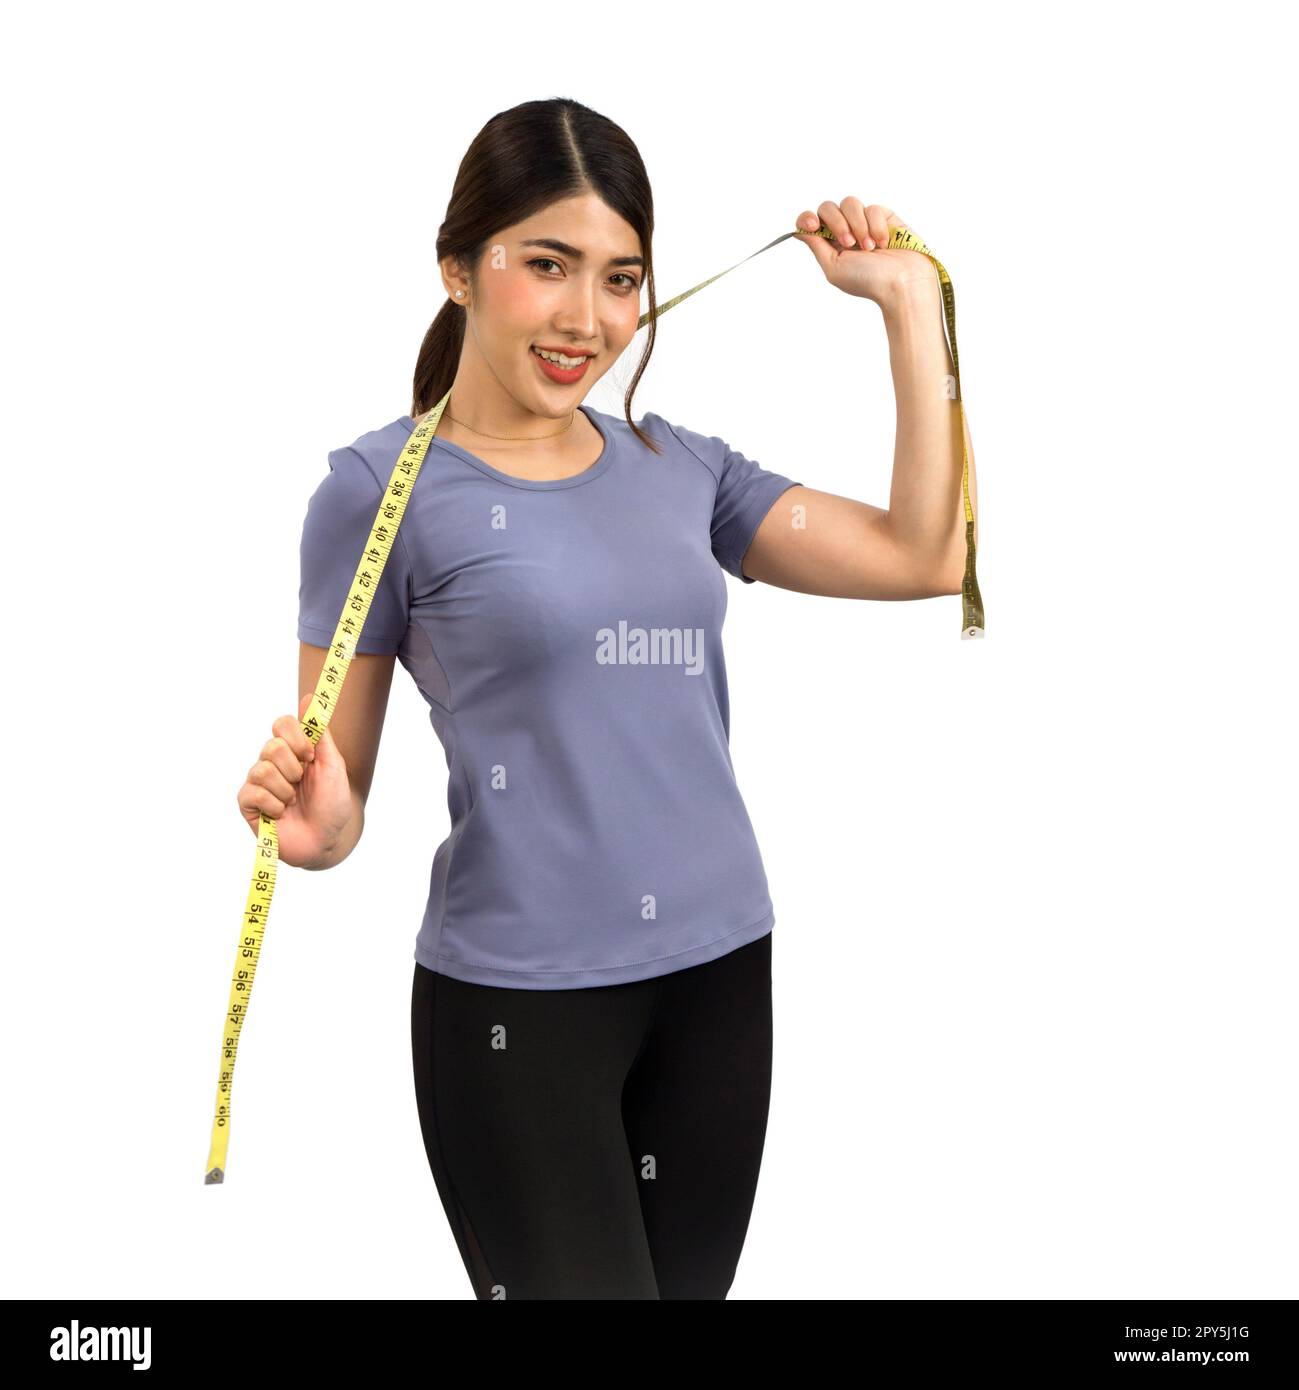 Young Asian woman in fitness clothes holding a measuring tape with a smile. Portrait on white background with studio light. Healthy nutrition and weight losing concept. Stock Photo